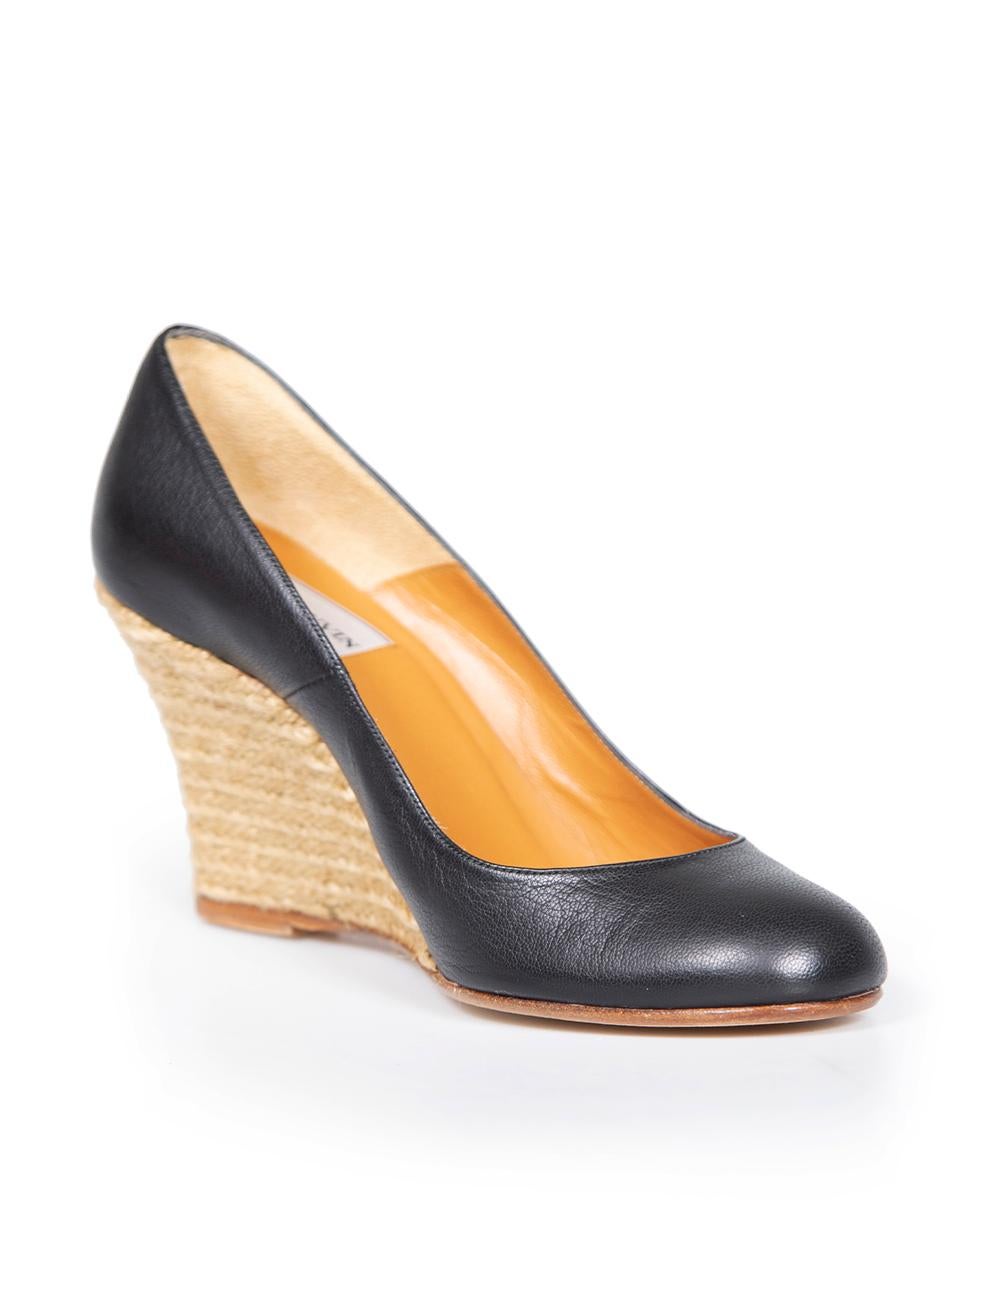 CONDITION is Never worn. No visible wear to wedges is evident on this new Lanvin designer resale item.
 
 
 
 Details
 
 
 Black
 
 Leather
 
 Wedge pumps
 
 Espadrille wedge
 
 Mid heel
 
 Round toe
 
 Slip on
 
 
 
 
 
 Made in Spain
 
 
 
